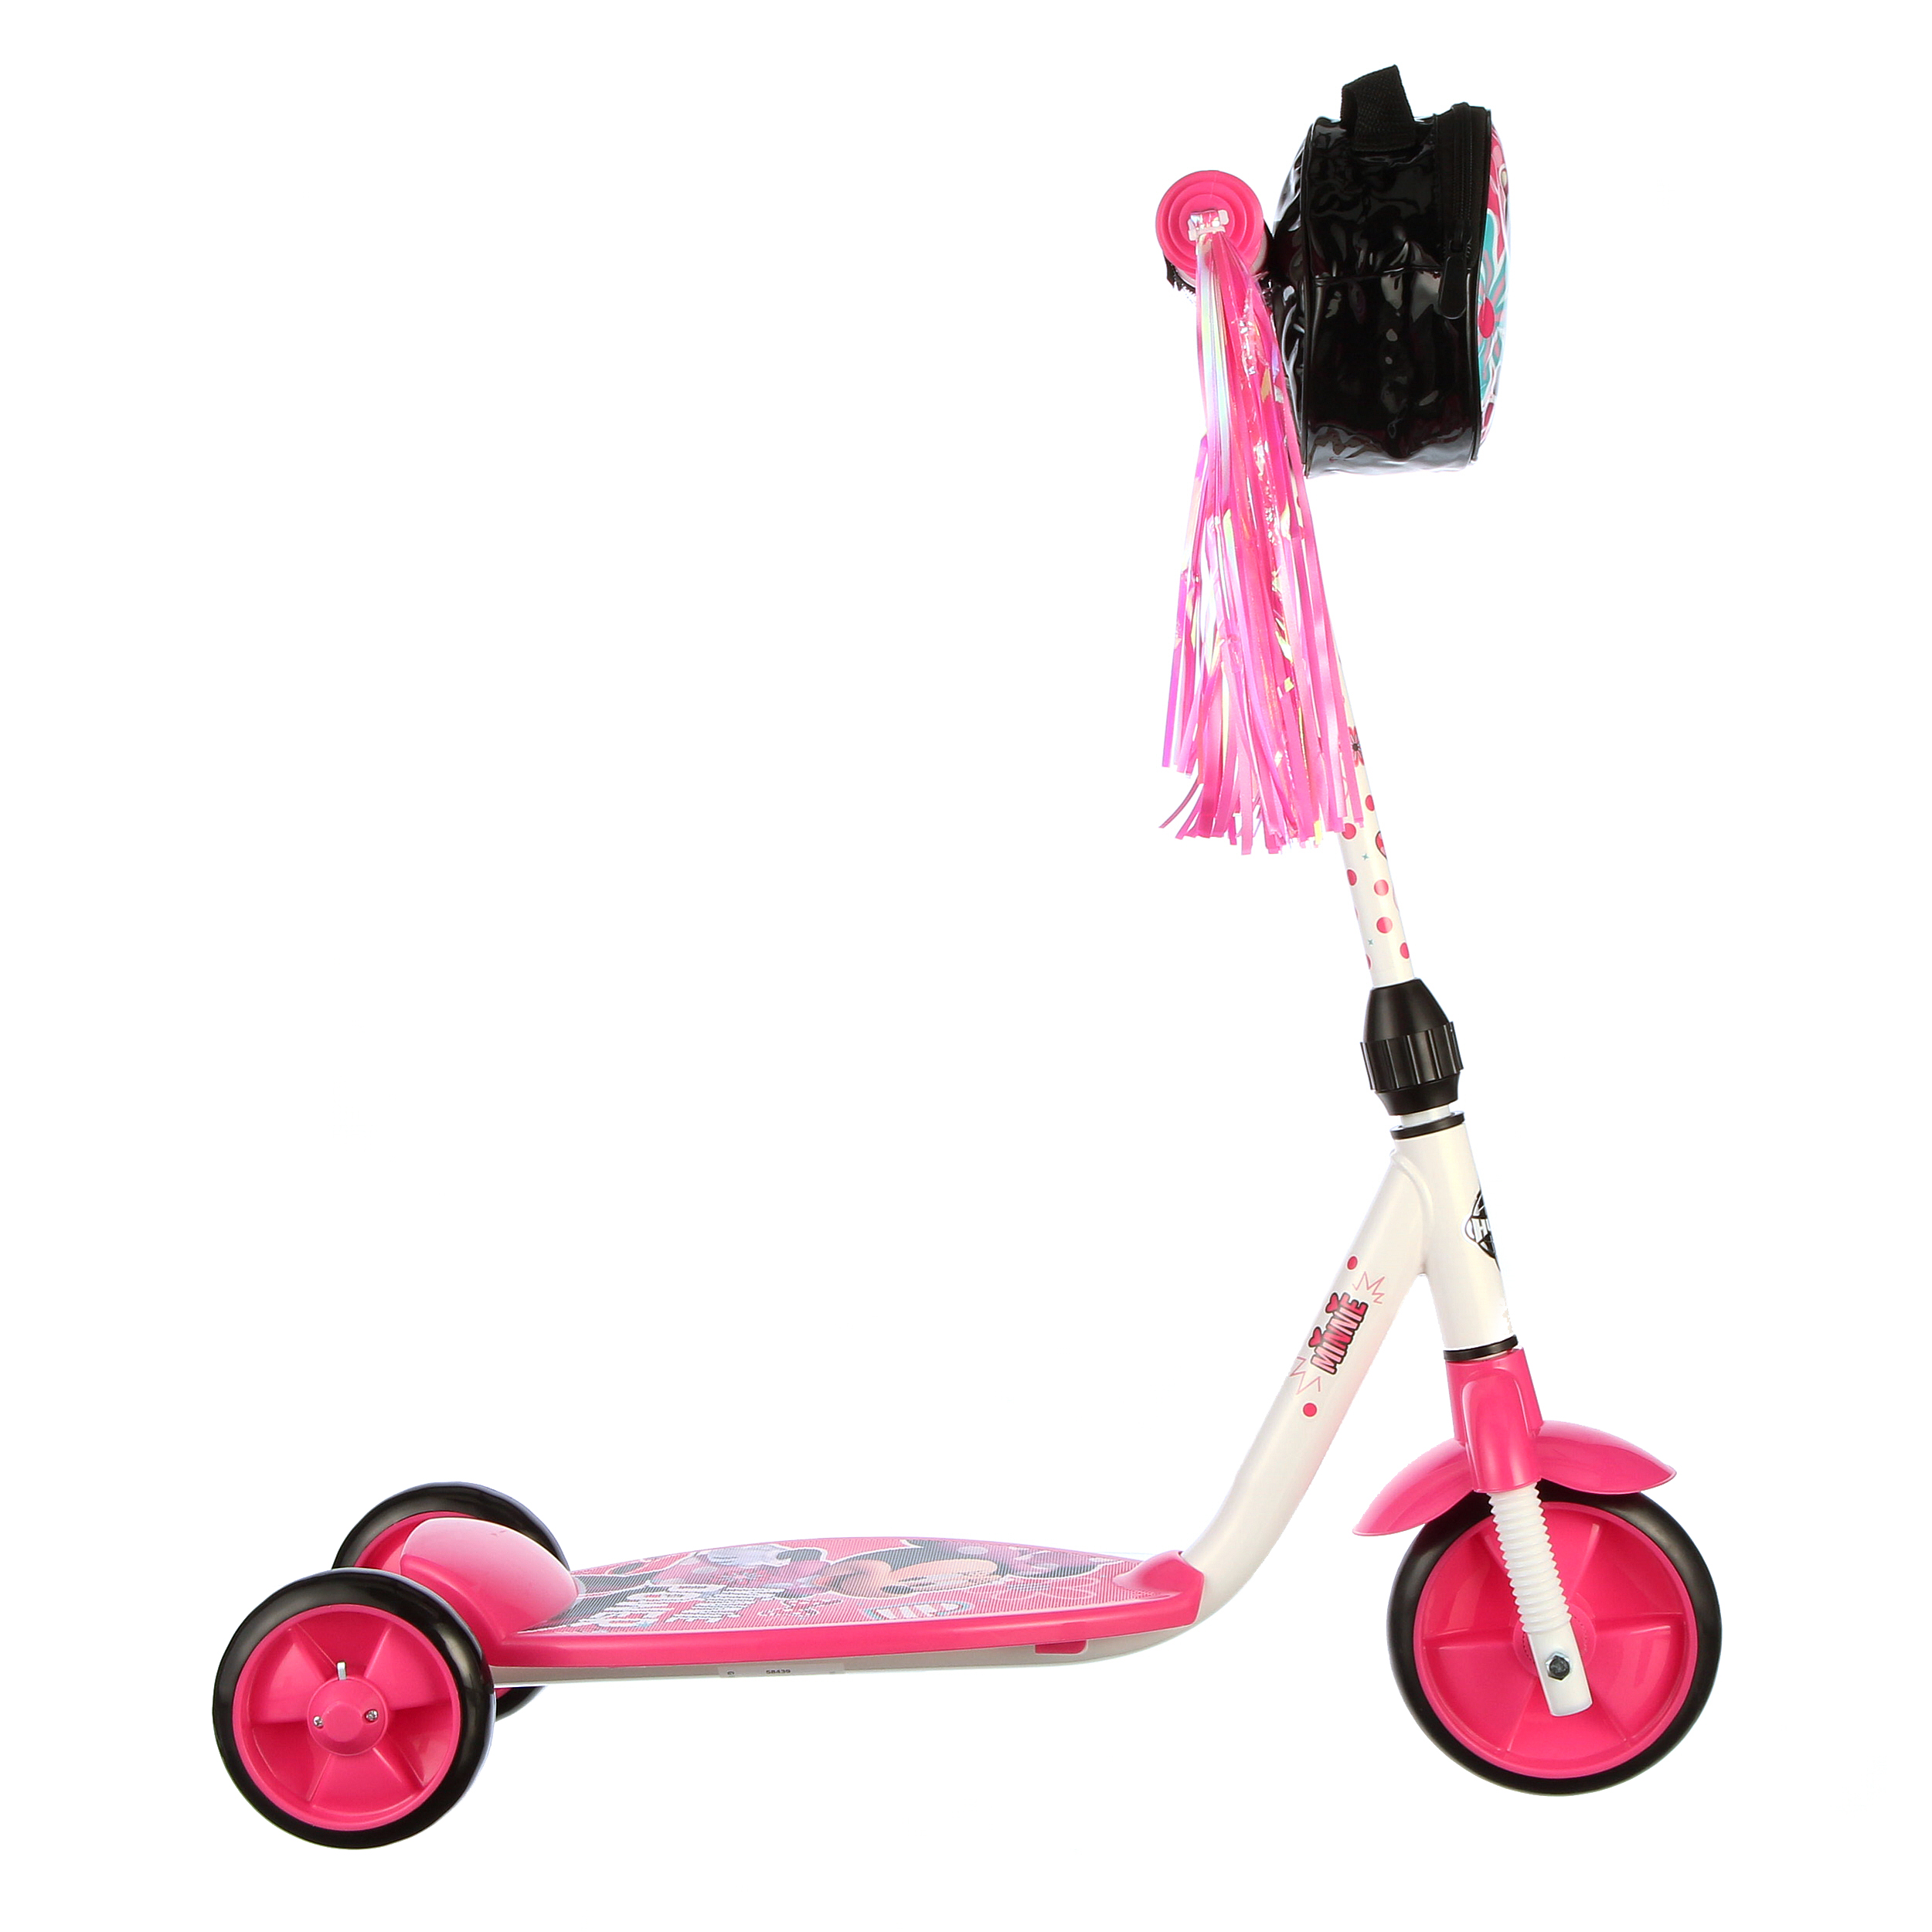 Disney Minnie 3 Wheel Preschool Scooter for Girls by Huffy - image 4 of 5